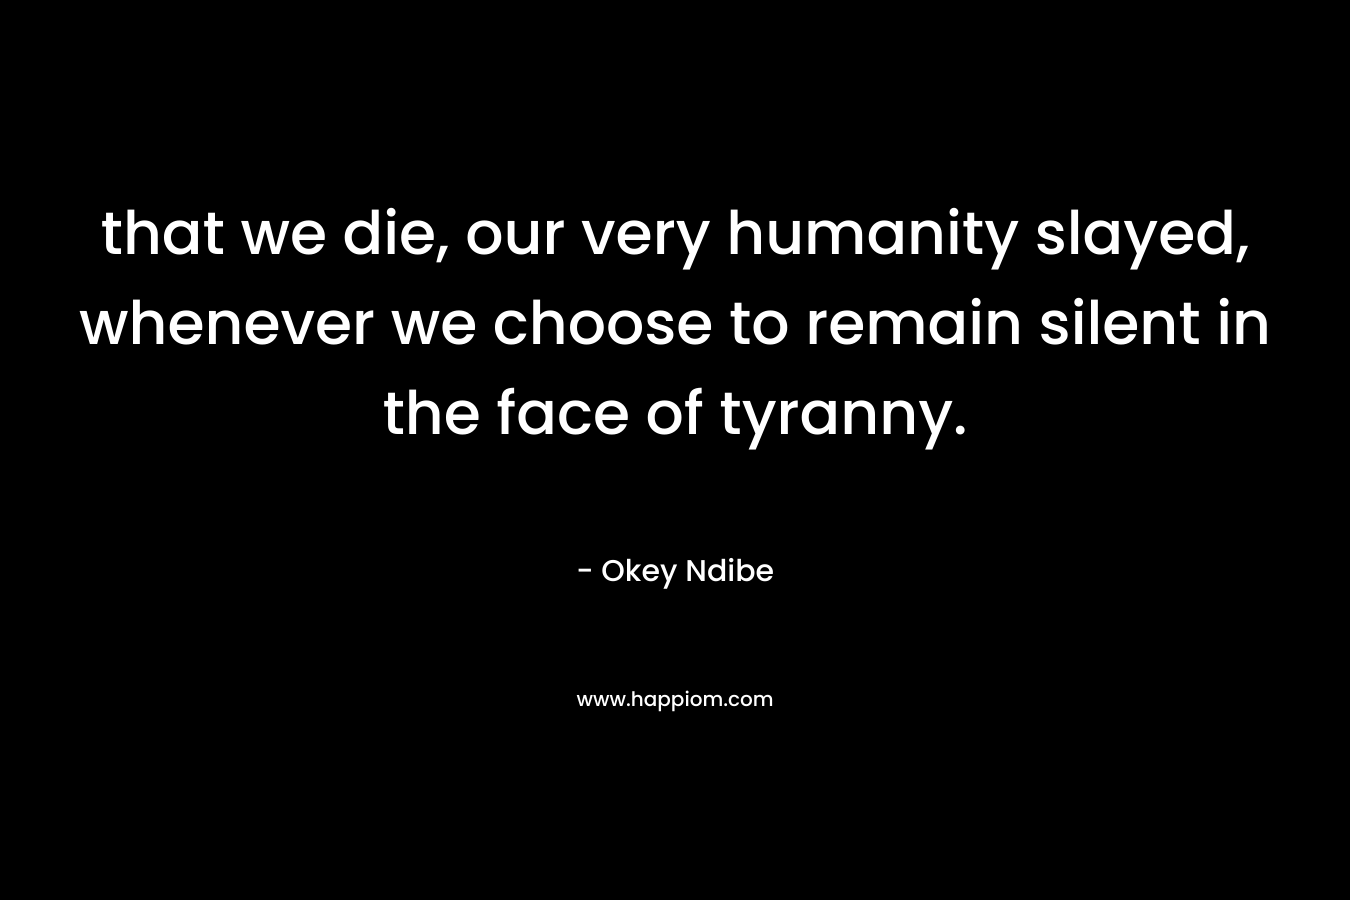 that we die, our very humanity slayed, whenever we choose to remain silent in the face of tyranny.